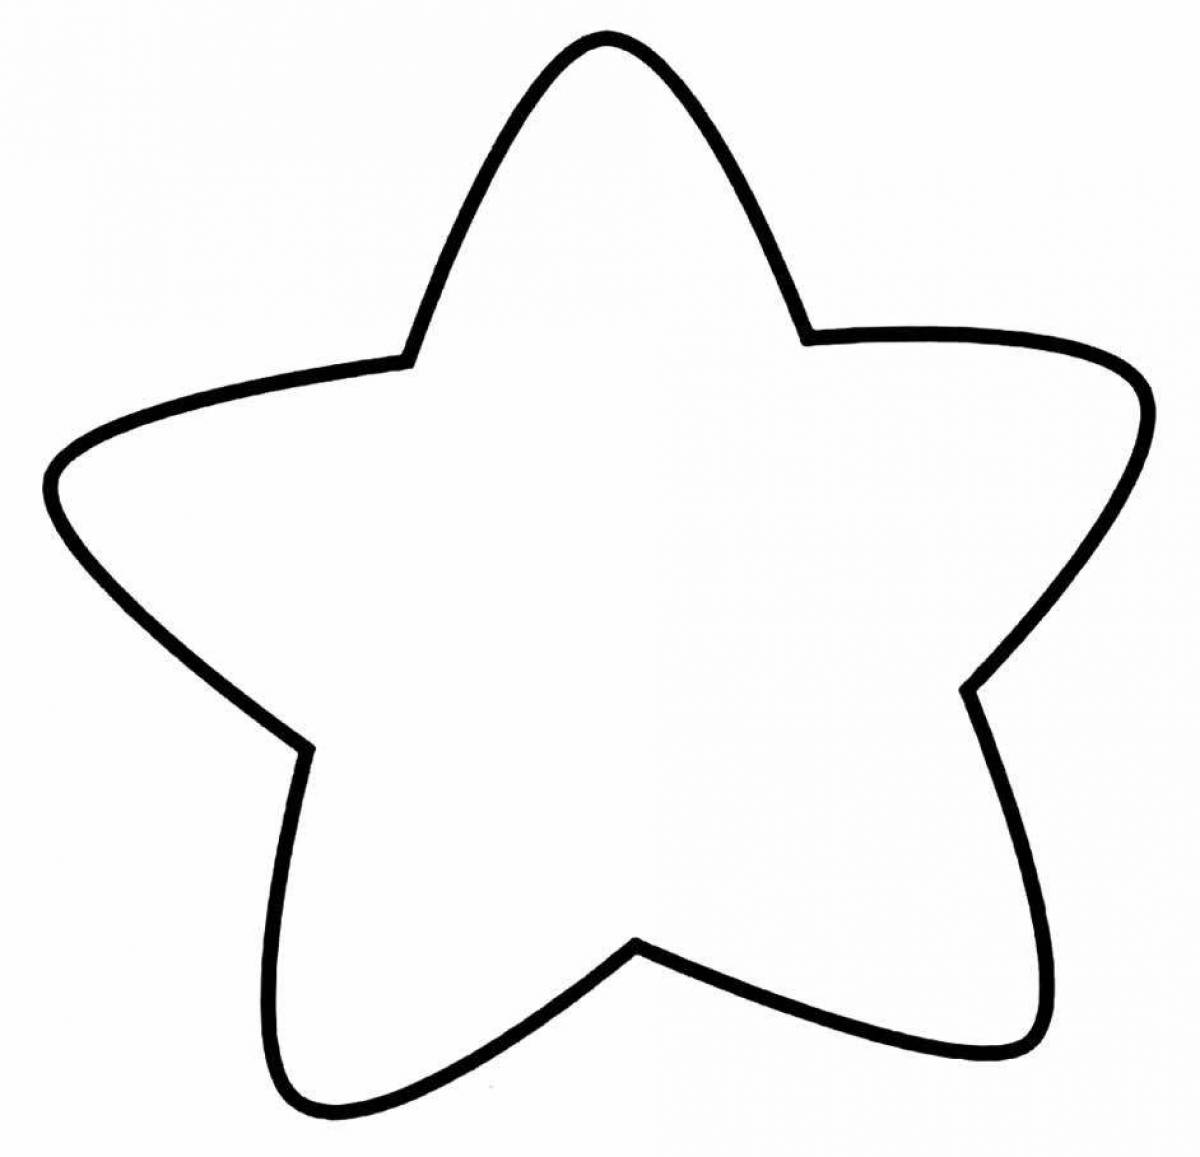 Charming star coloring book for preschoolers